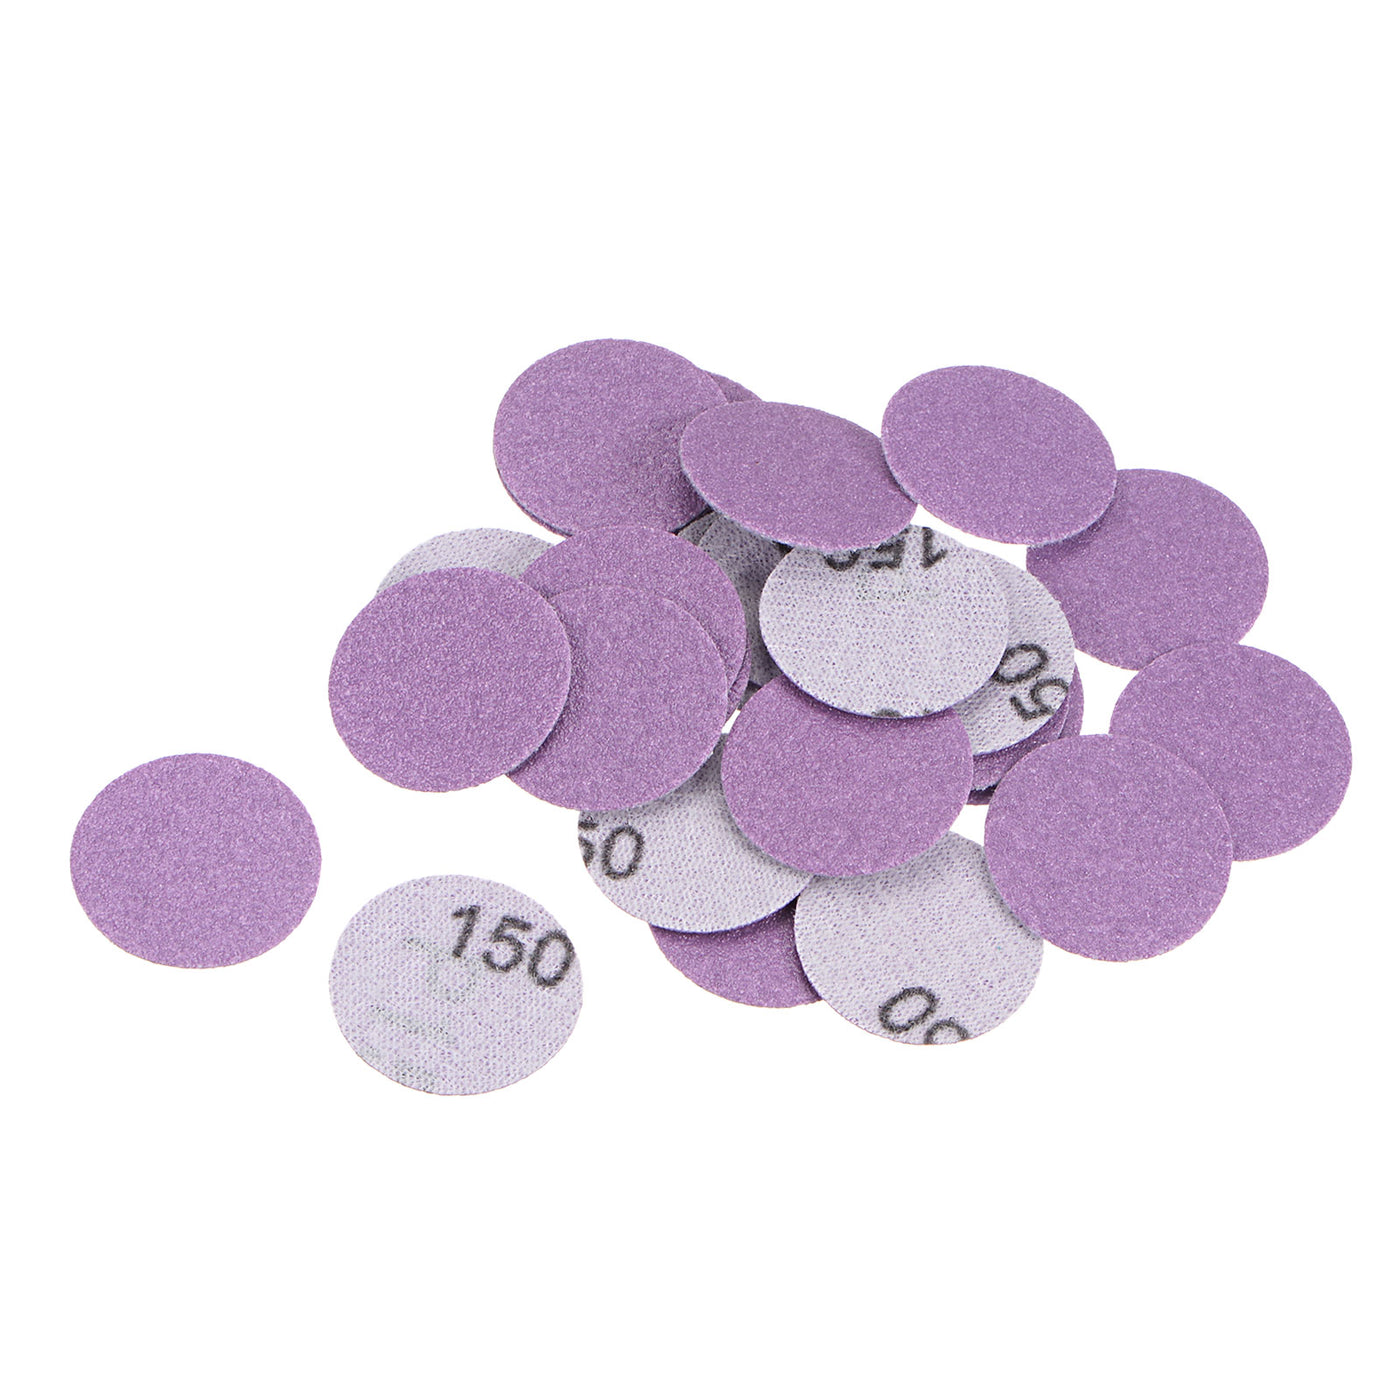 uxcell Uxcell Sanding Discs Hook & Loop Sandpapers Mini Size